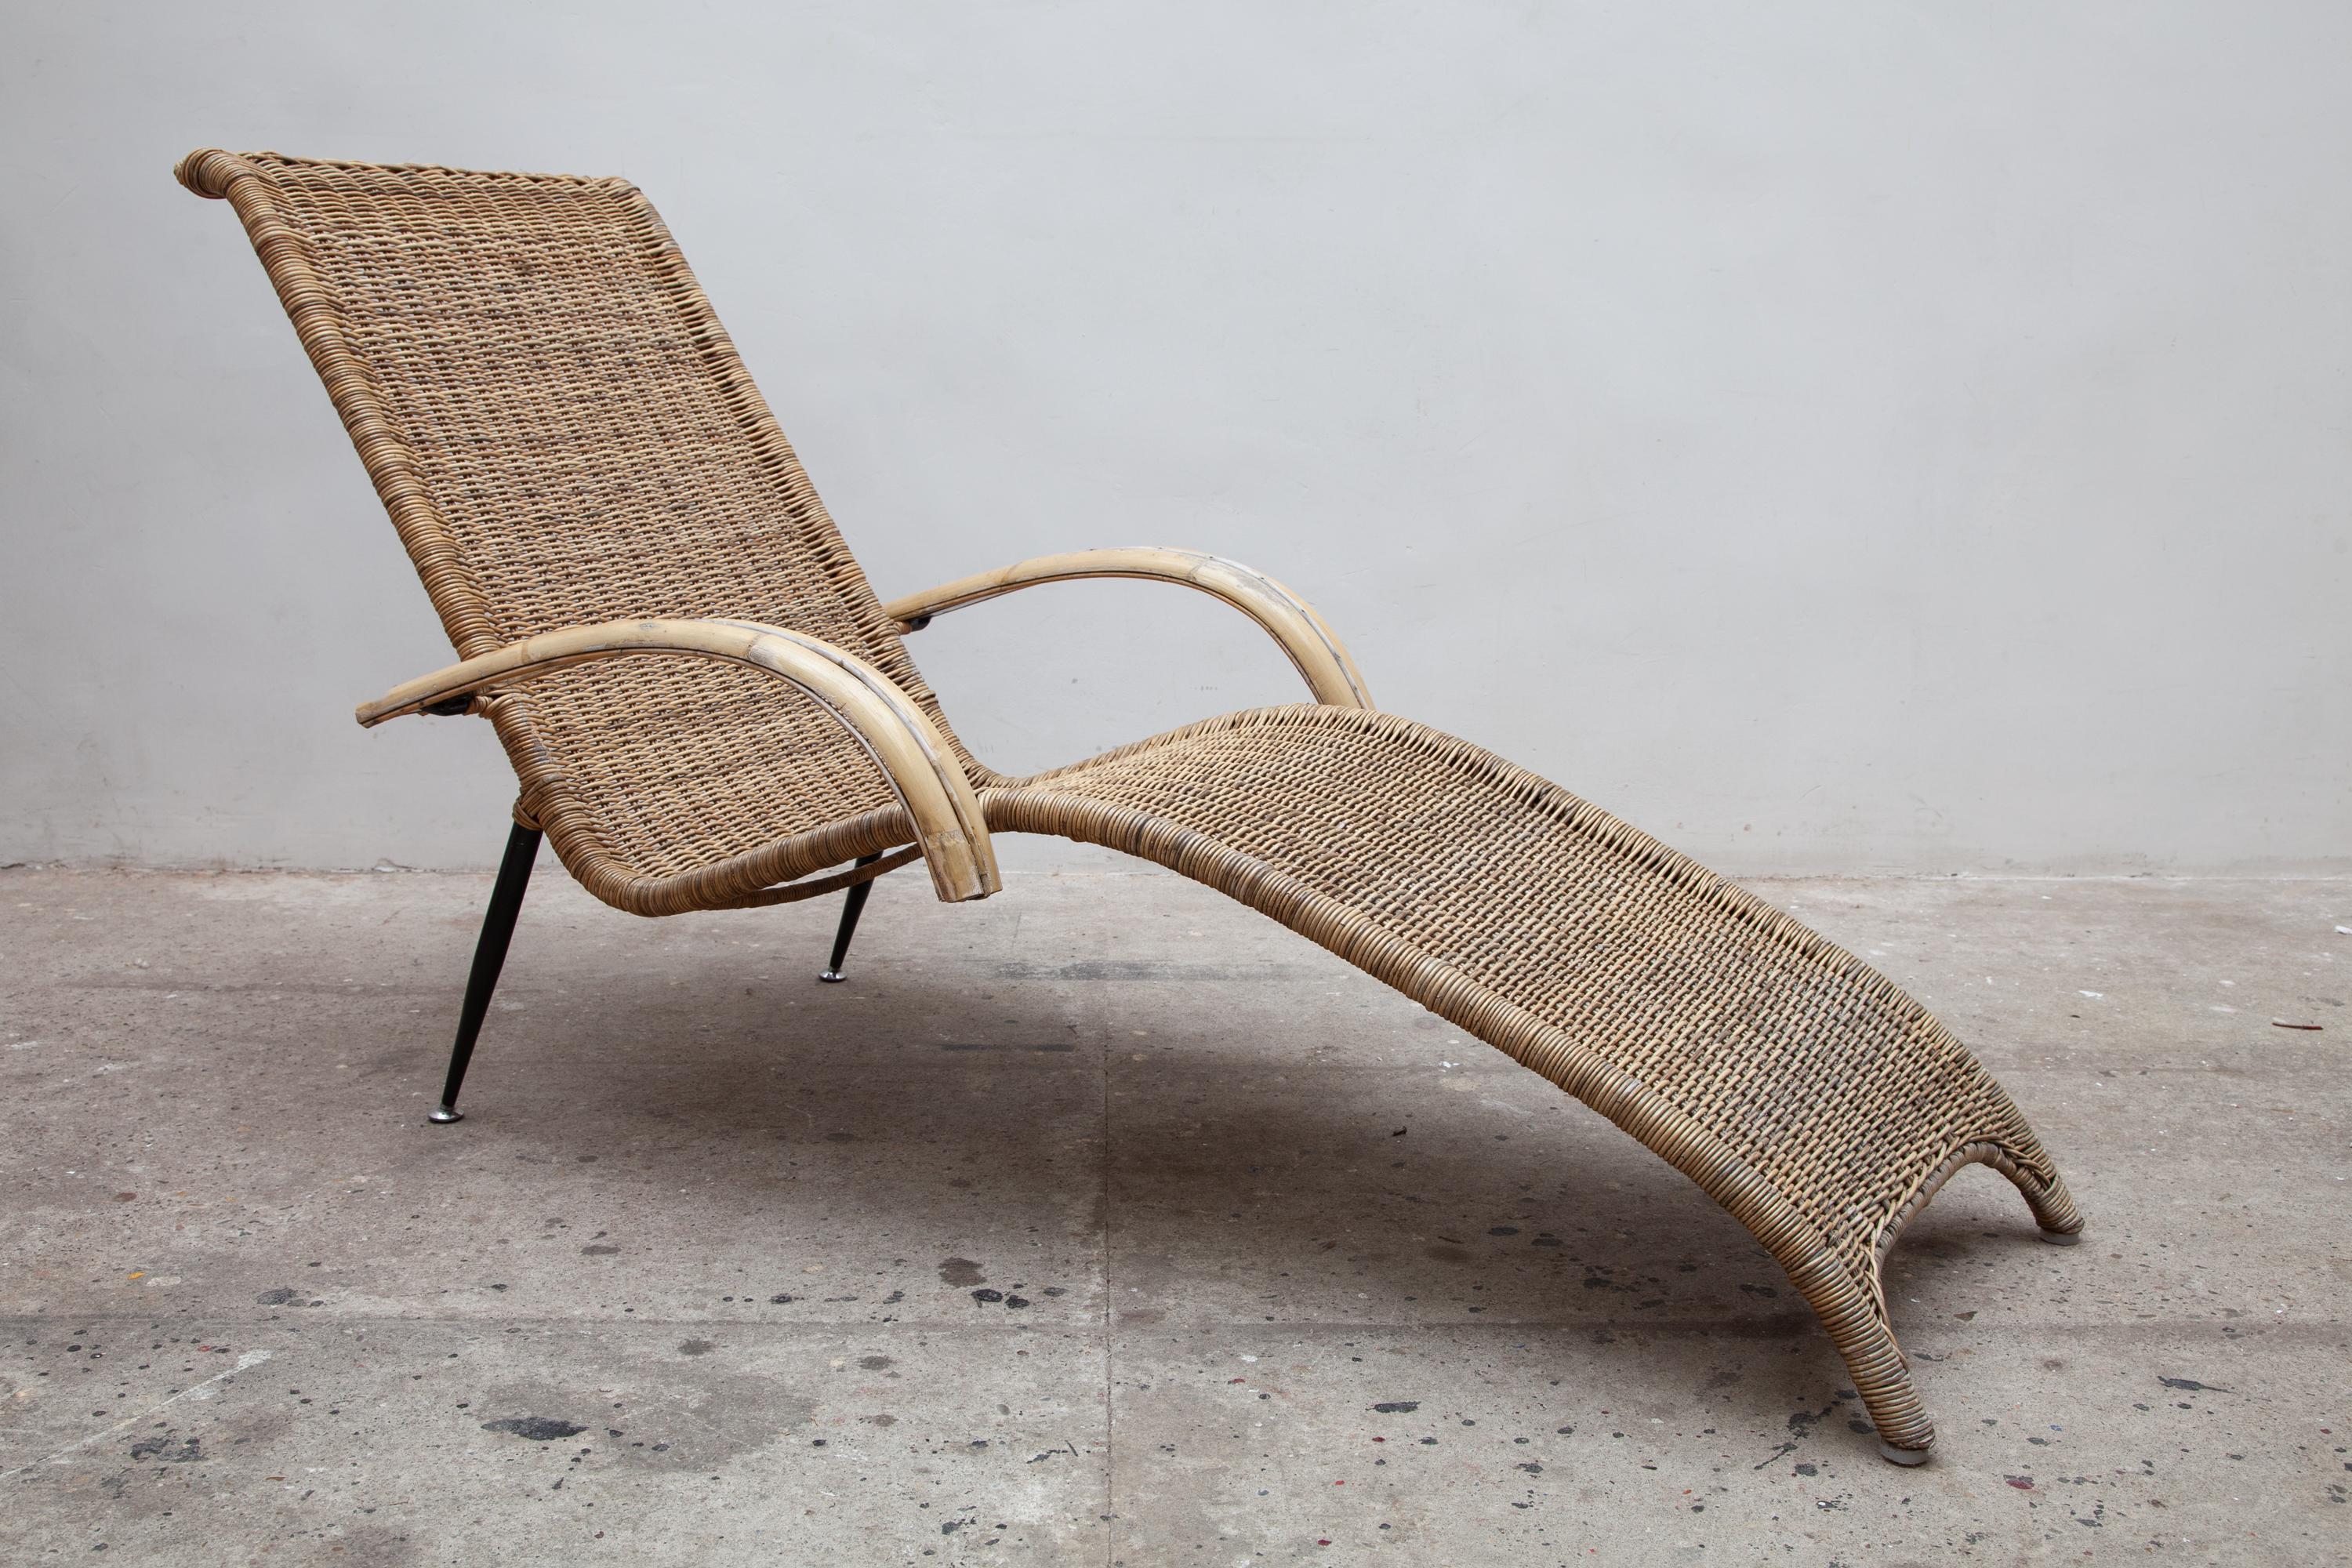 Rattan garden mid century lounge chairs. Woven wicker with bamboo armrests and metal legs. Sturdy metal frame.

Dimensions: 170 W x 70 D x 86 H cm.